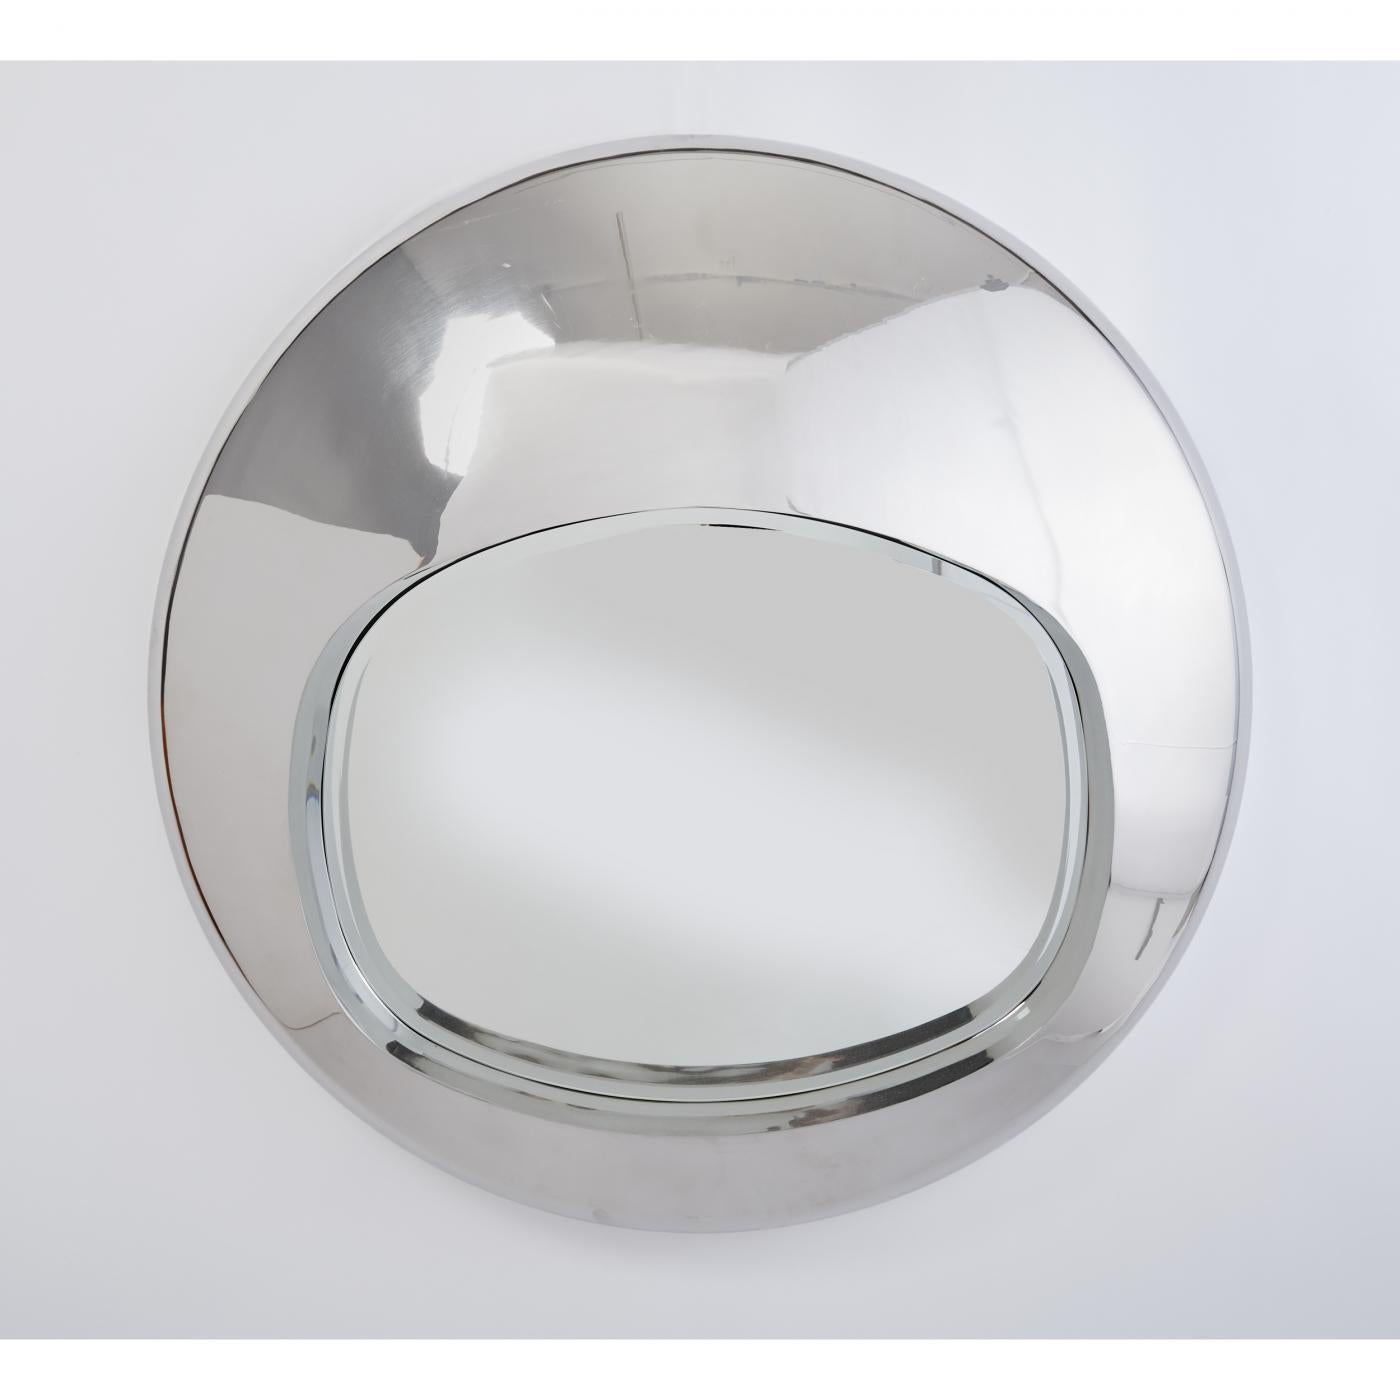 Spectacular Chromed Futuristic Mirror, France 1970's In Good Condition For Sale In New York, NY